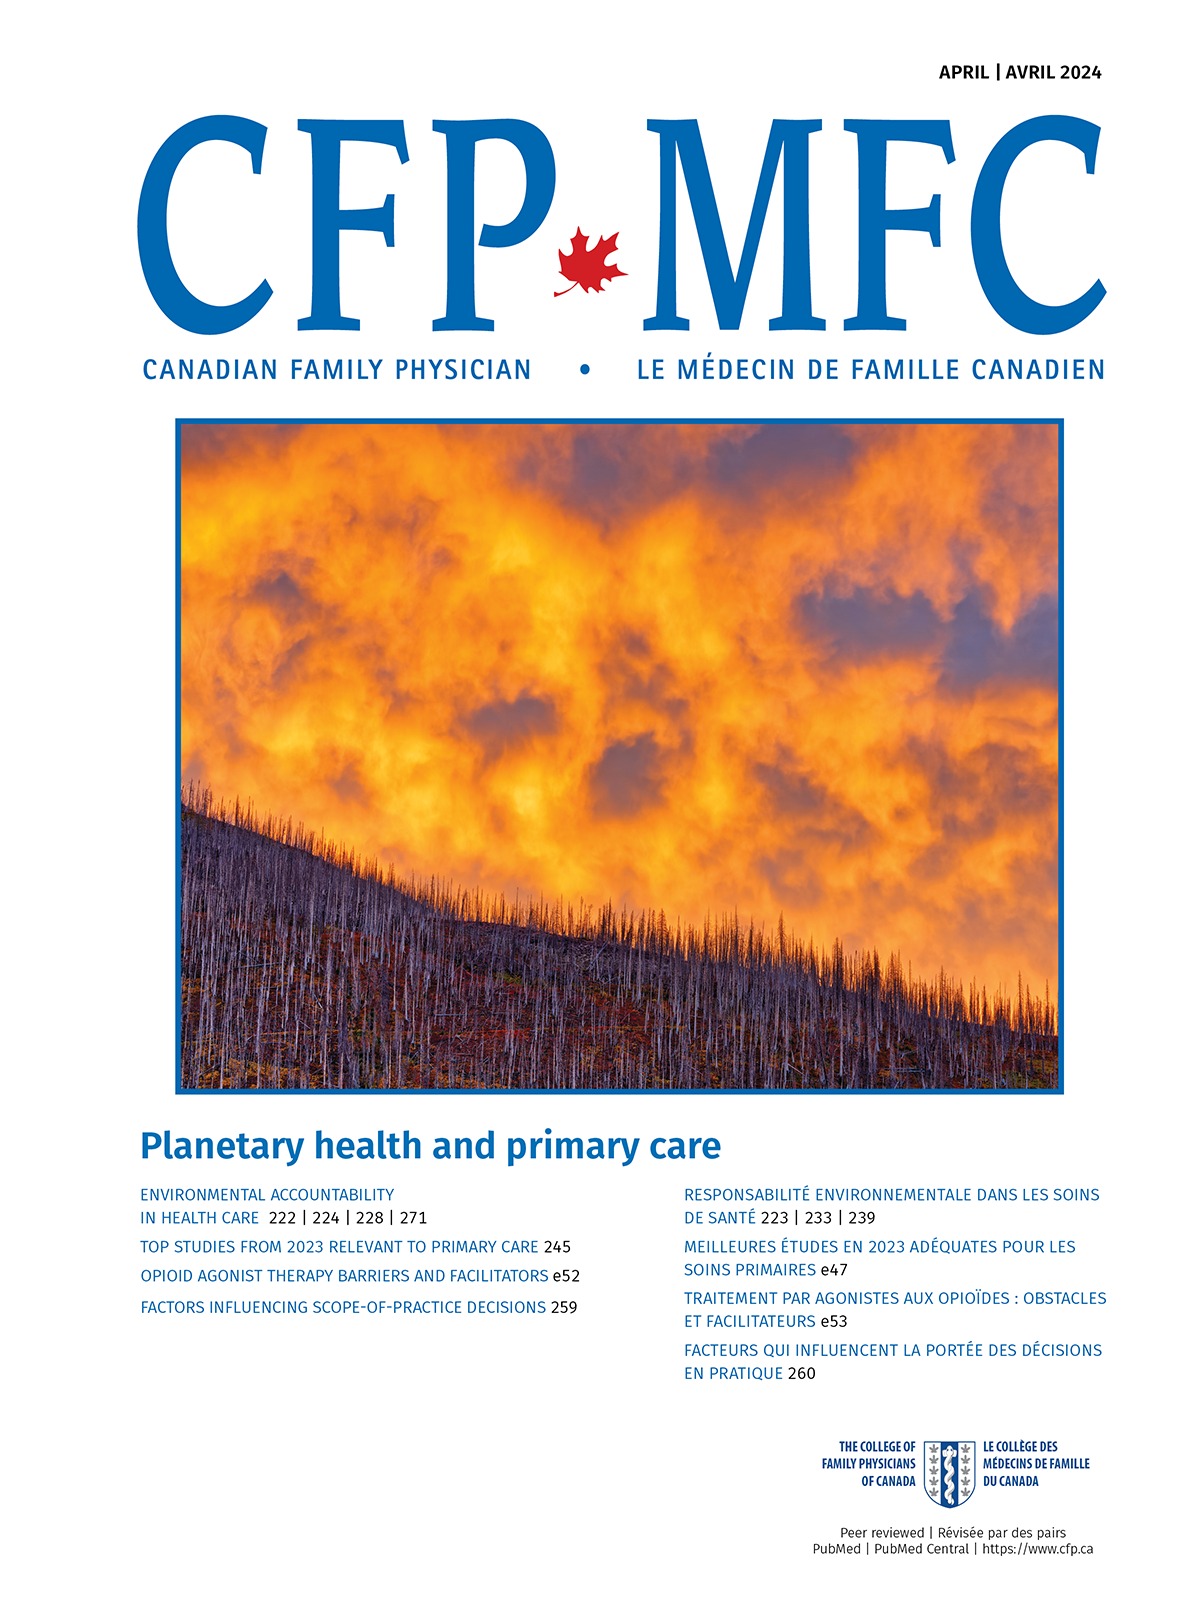 Planetary health in primary care